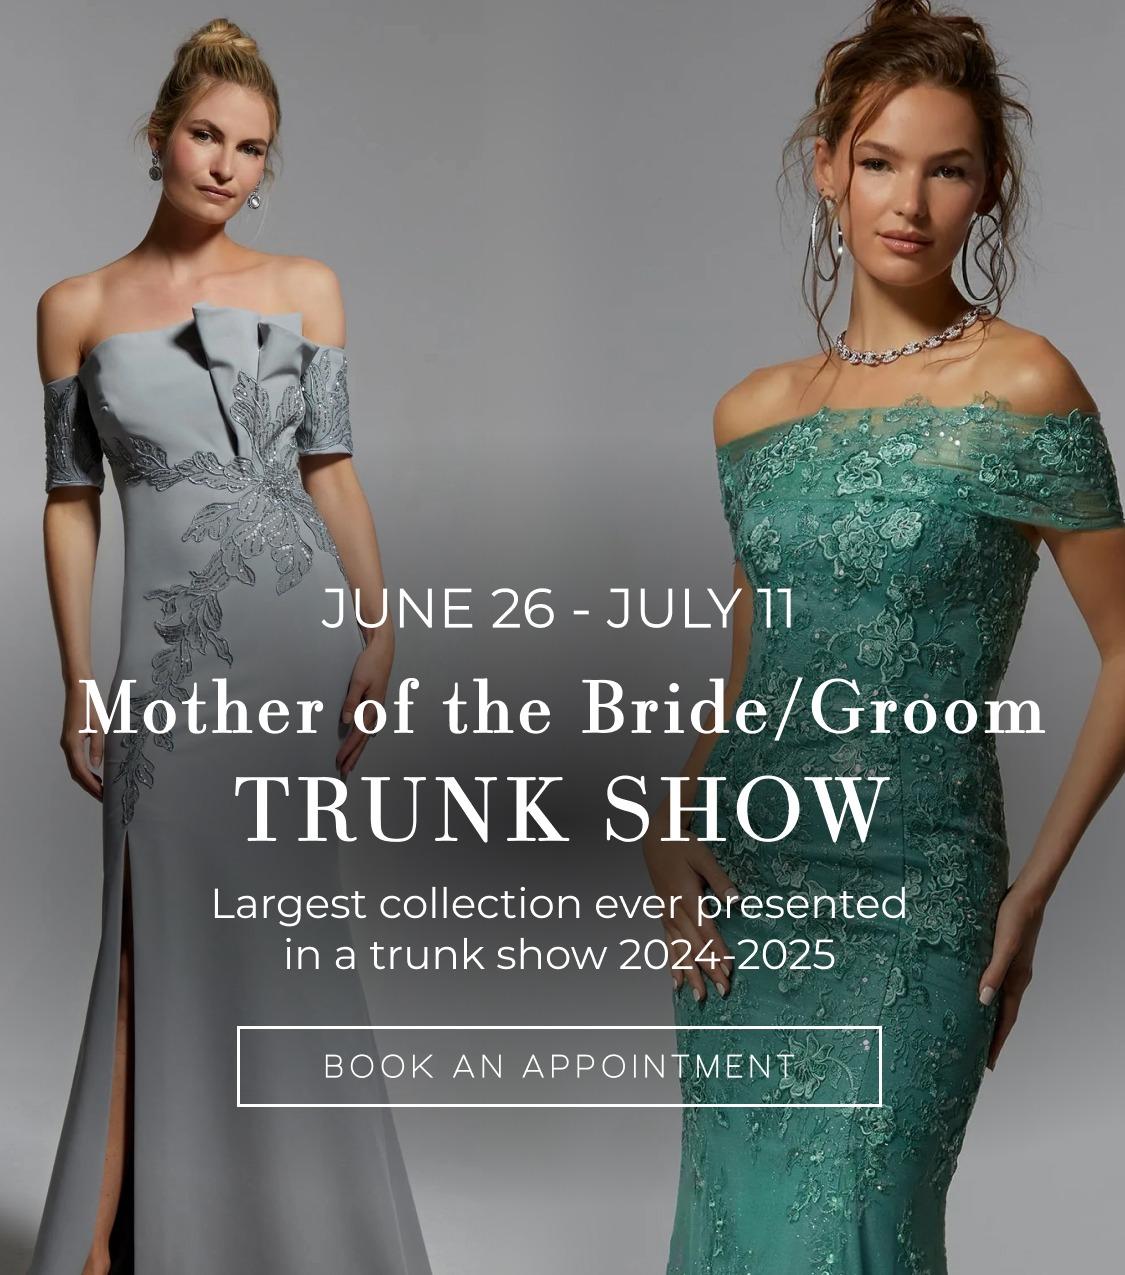 mother of the bride trunk show june - july 2024 banner